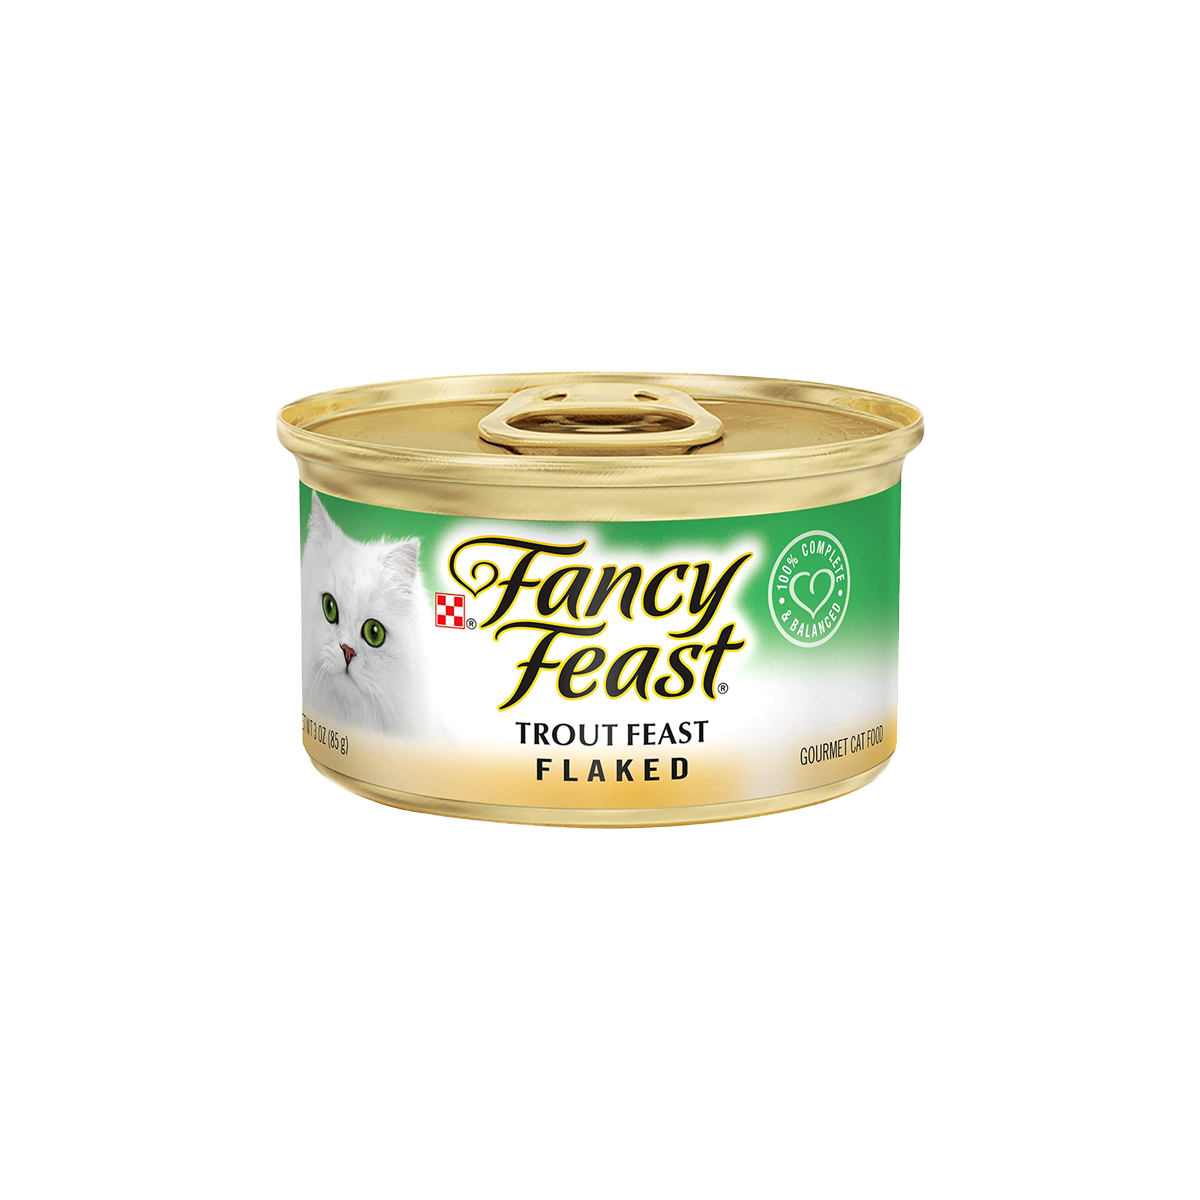 Purina-FancyFeast-trout-feast-flaked.png